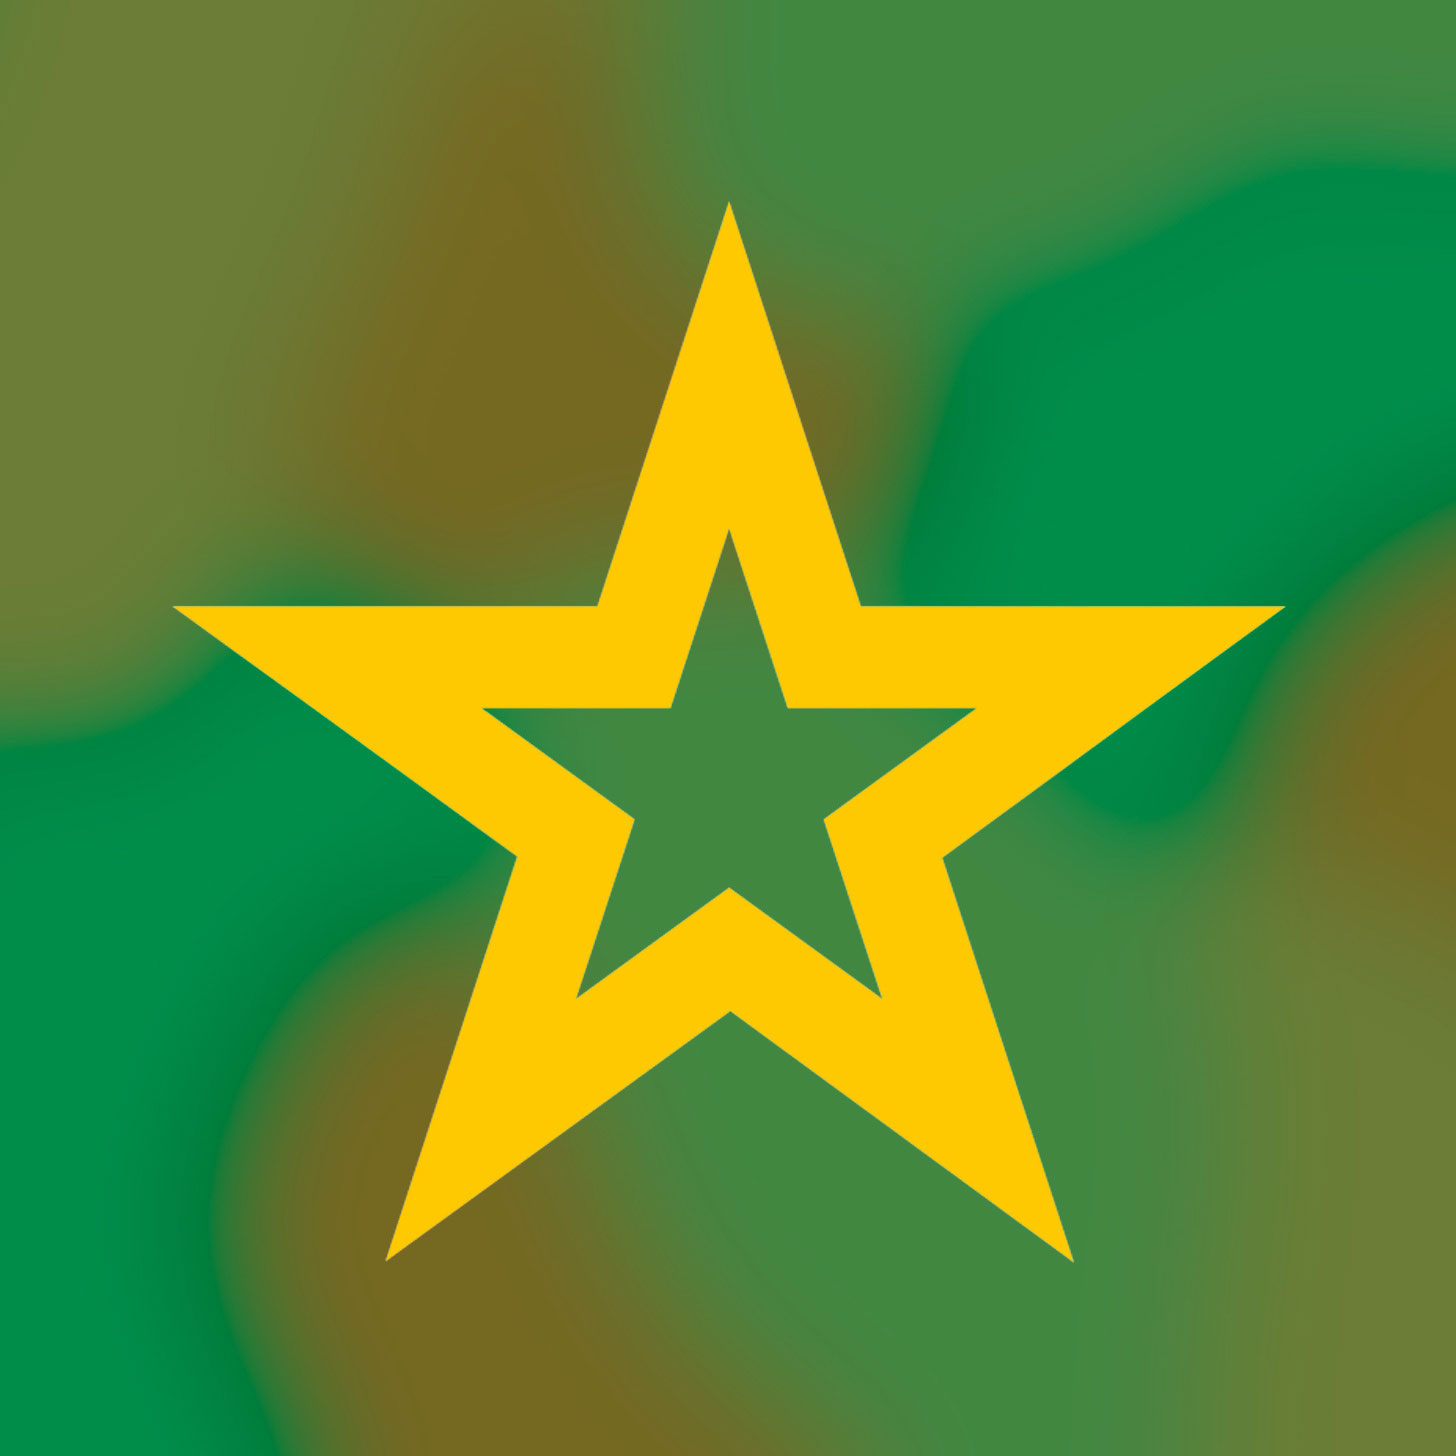 Gold Army star on a camo background